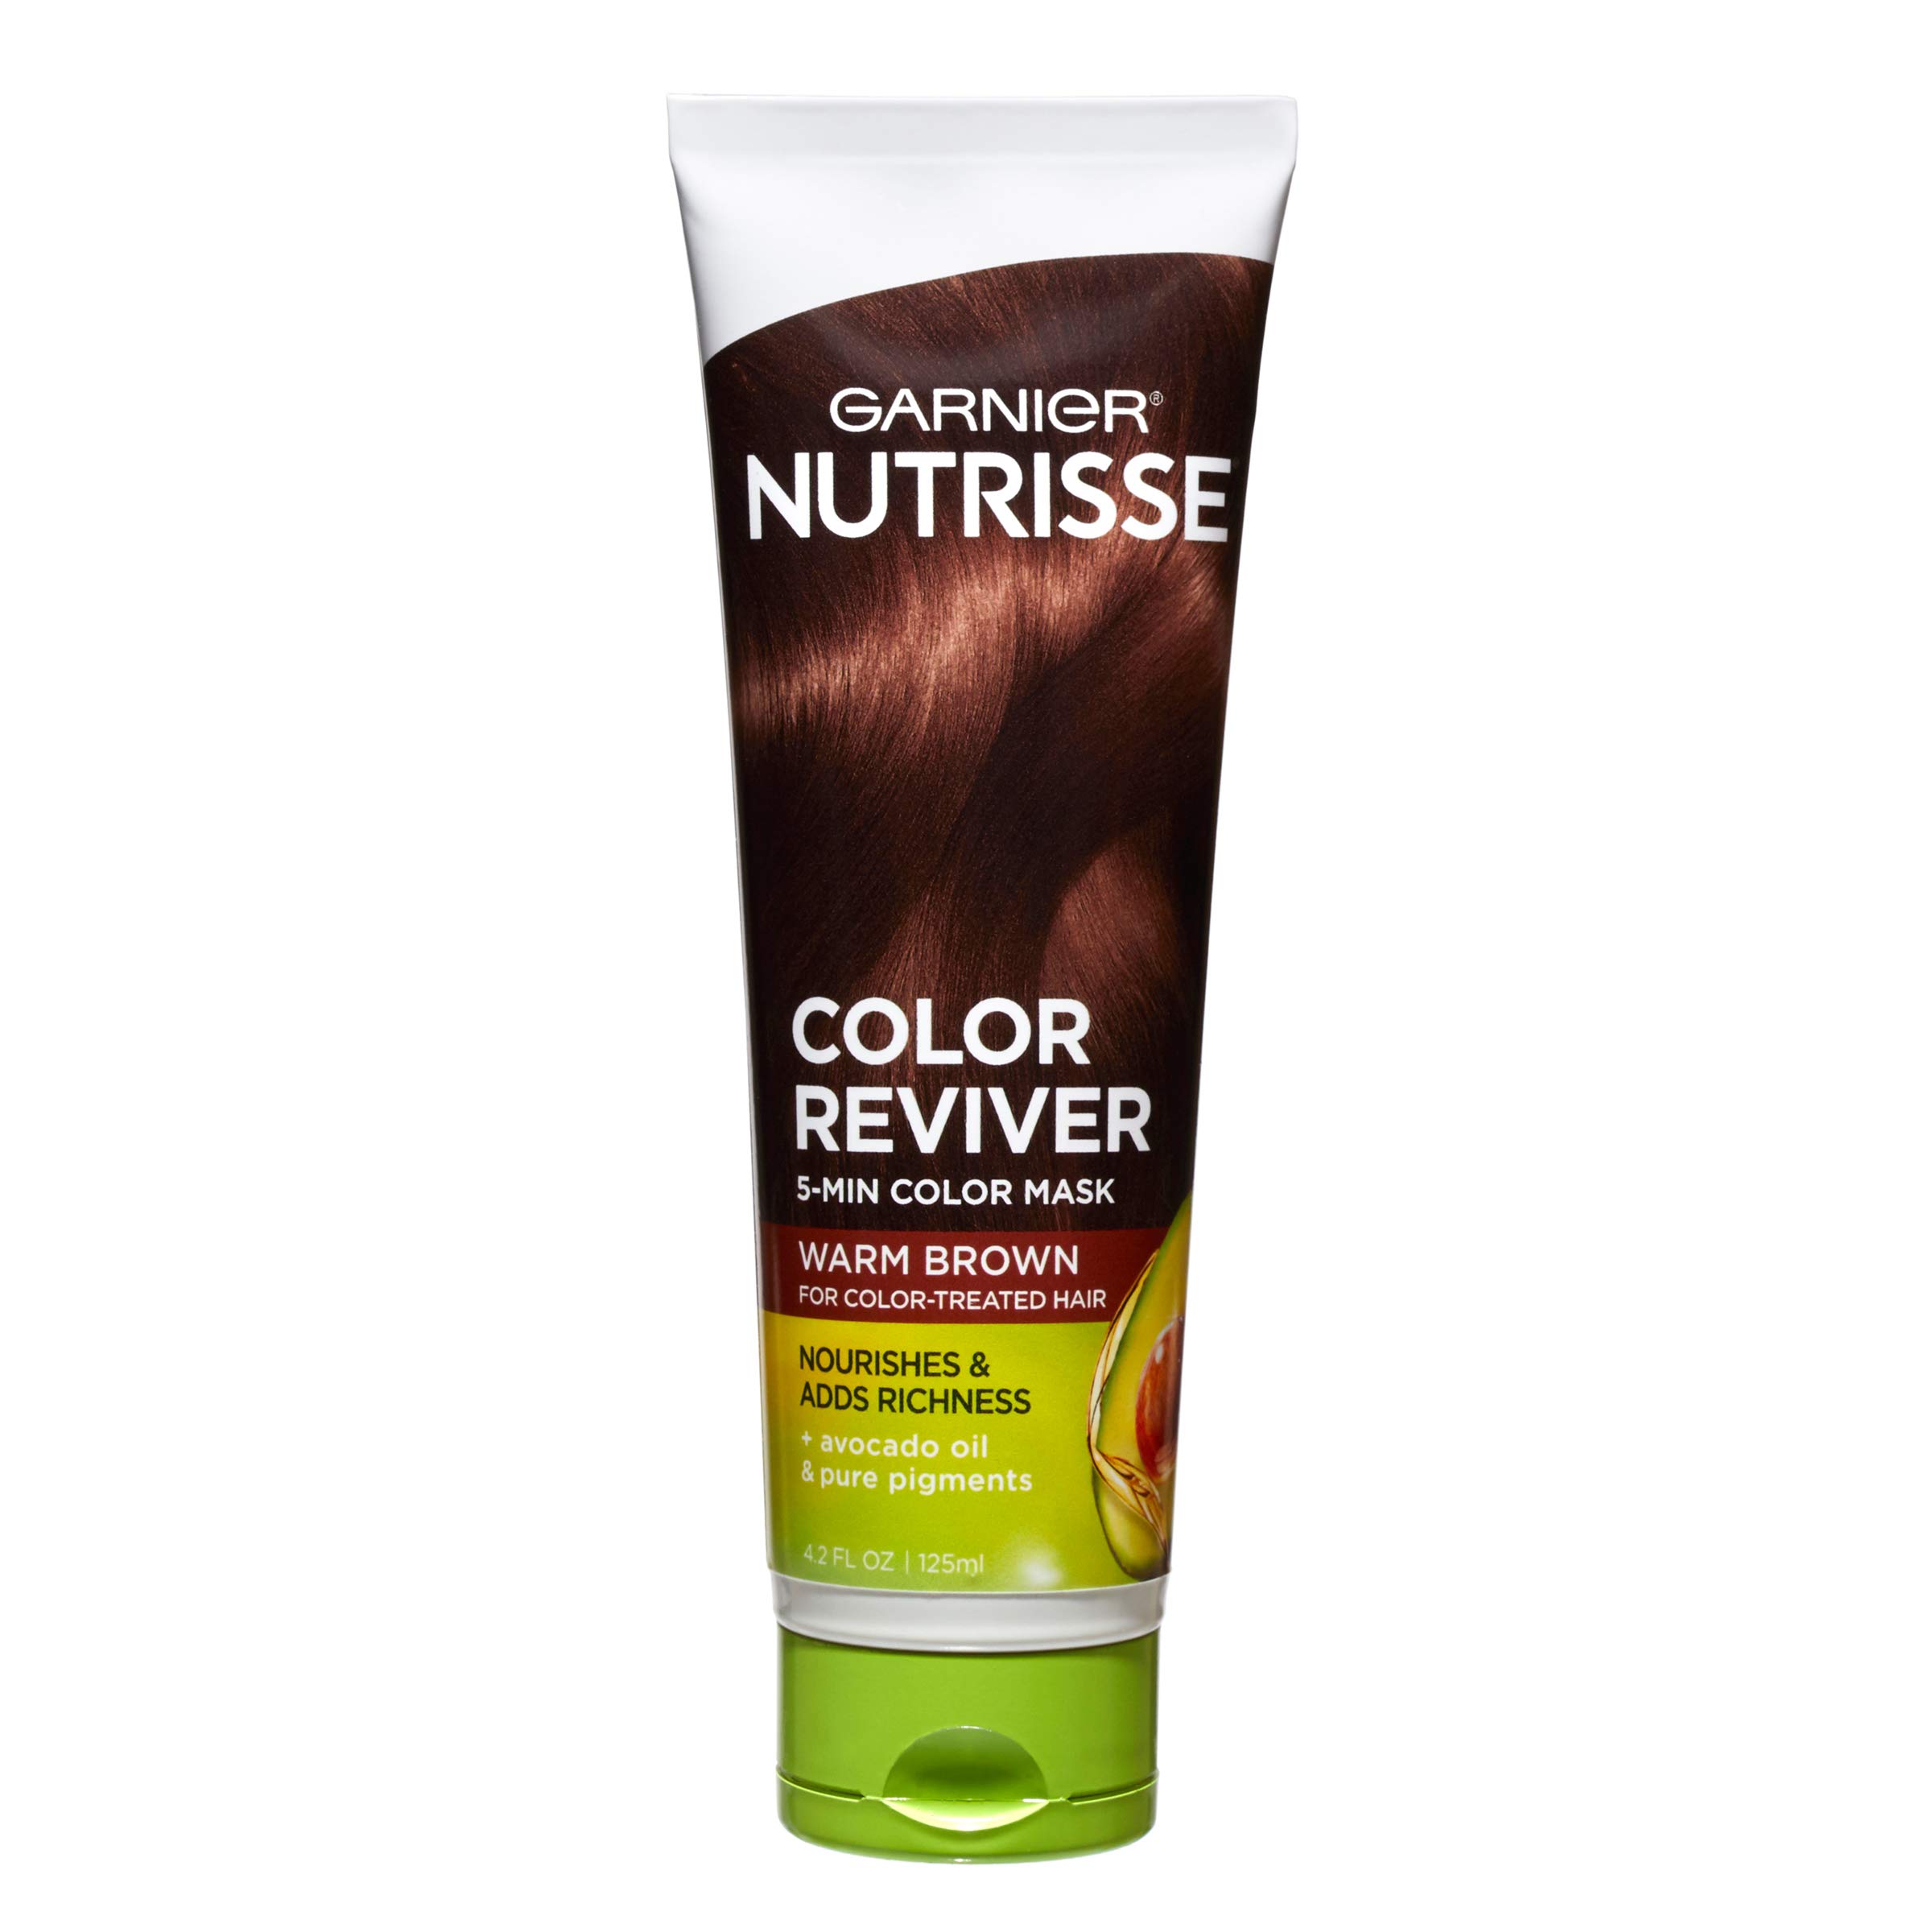 Garnier Nutrisse 5 Minute Nourishing Color Hair Mask with Triple Oils Delivers Day 1 Color Results, for Color Treated Hair, Warm Brown, 4.2 fl. oz.